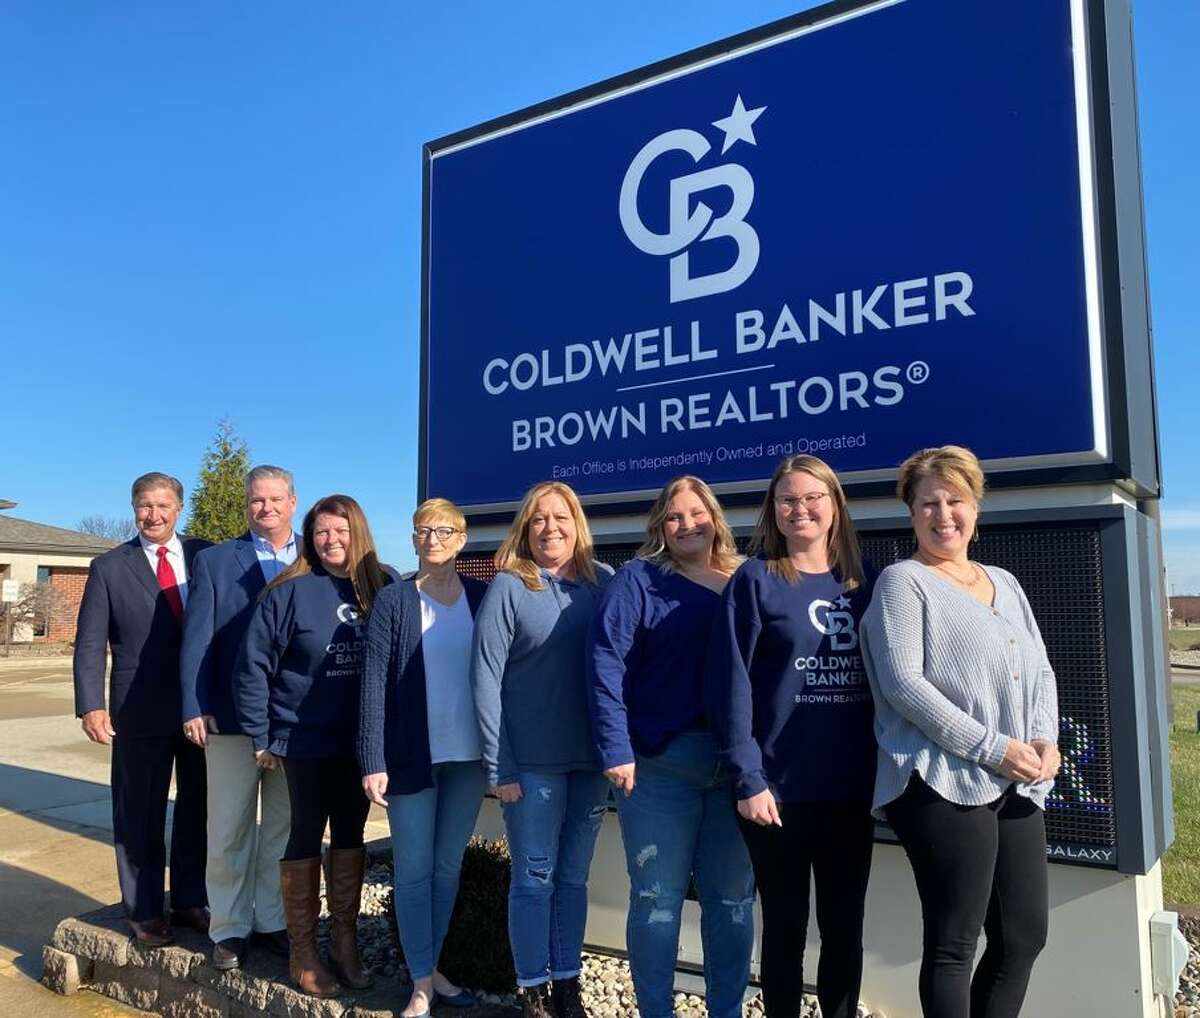 Coldwell Banker Brown Realtors has given back to 35 businesses and charities in celebration of its 50th Anniversary. From left are Gerry Schuetzenhofer, John McNamara, Jen Wolf, Elizabeth Robinson, Tracy Cameron, Jamie Budwell, Kourtney Green and Amy McGarr.